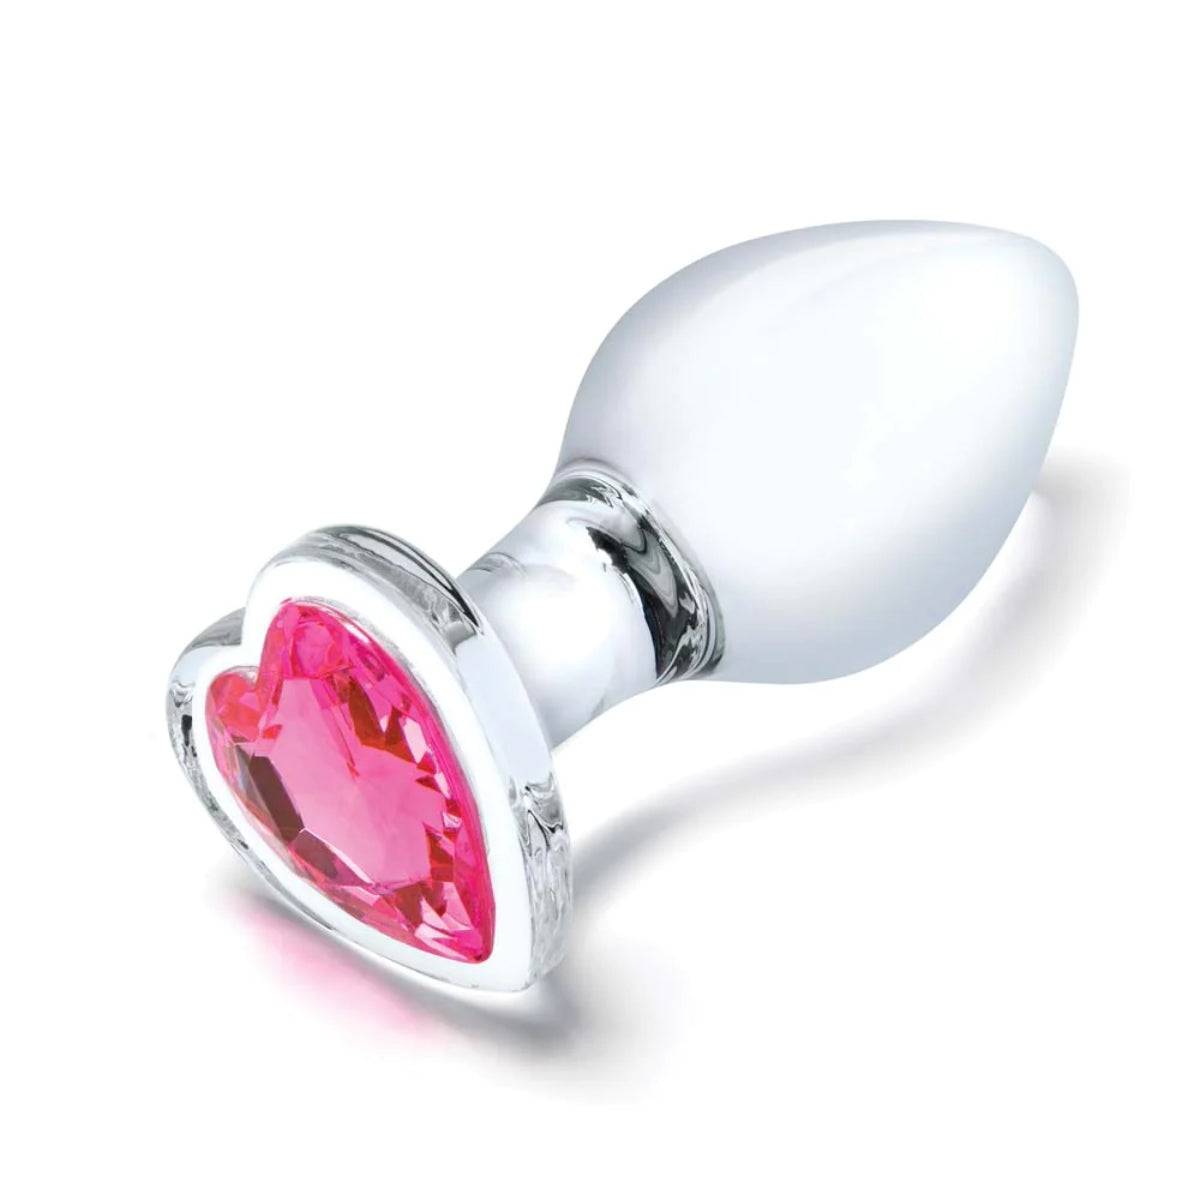 Product Side View - Glas Heart Jewel 3 Piece Anal Training Butt Plug Kit Clear 3 Inch 3.5 Inch 4 Inch - Simply Pleasure